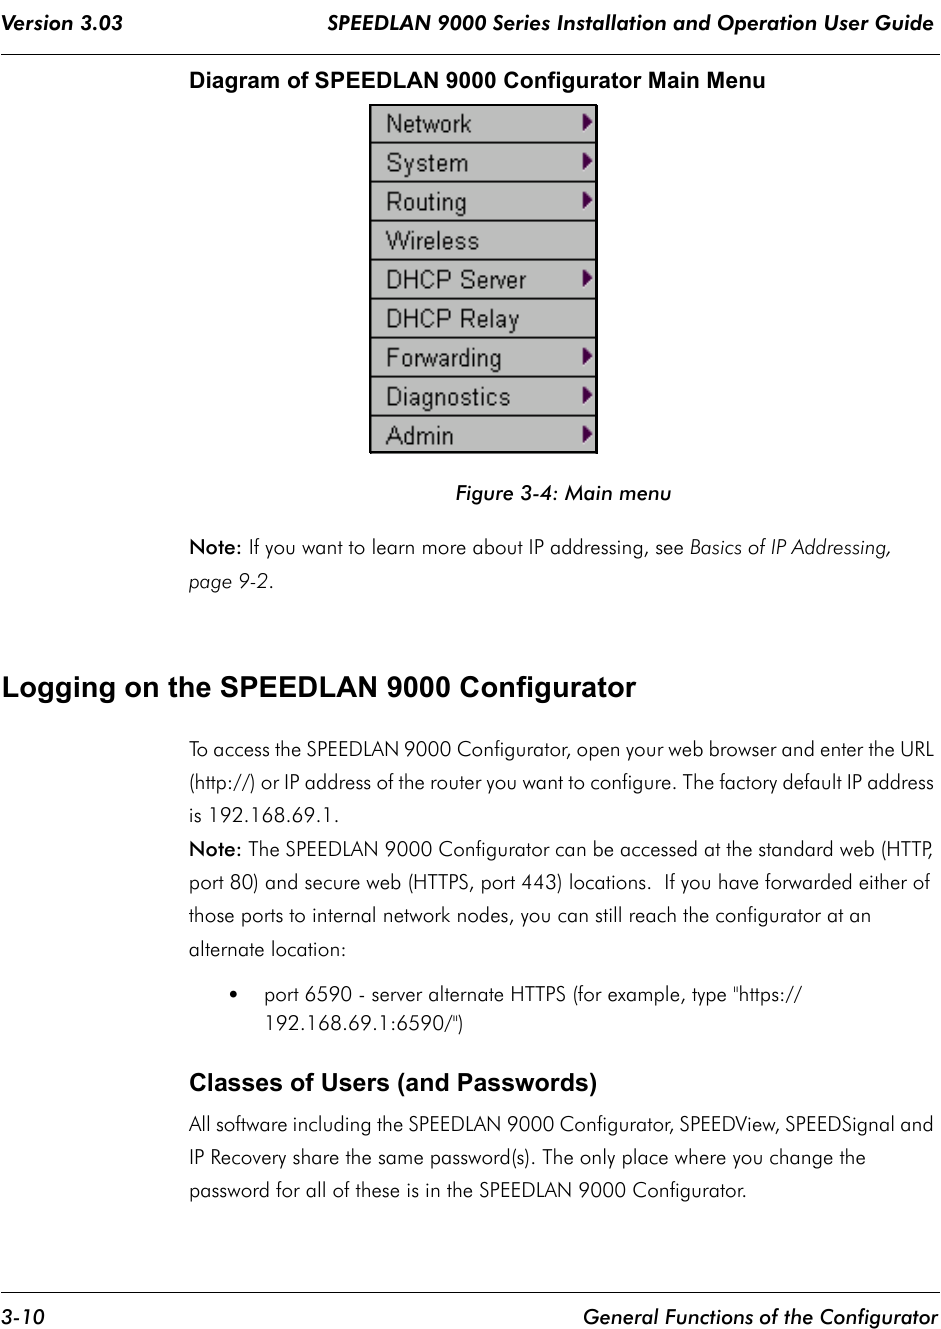 Version 3.03                                 SPEEDLAN 9000 Series Installation and Operation User Guide 3-10 General Functions of the ConfiguratorDiagram of SPEEDLAN 9000 Configurator Main MenuFigure 3-4: Main menuNote: If you want to learn more about IP addressing, see Basics of IP Addressing, page 9-2.Logging on the SPEEDLAN 9000 ConfiguratorTo access the SPEEDLAN 9000 Configurator, open your web browser and enter the URL (http://) or IP address of the router you want to configure. The factory default IP address is 192.168.69.1. Note: The SPEEDLAN 9000 Configurator can be accessed at the standard web (HTTP, port 80) and secure web (HTTPS, port 443) locations.  If you have forwarded either of those ports to internal network nodes, you can still reach the configurator at an alternate location: •port 6590 - server alternate HTTPS (for example, type &quot;https://192.168.69.1:6590/&quot;)Classes of Users (and Passwords)All software including the SPEEDLAN 9000 Configurator, SPEEDView, SPEEDSignal and IP Recovery share the same password(s). The only place where you change the password for all of these is in the SPEEDLAN 9000 Configurator.